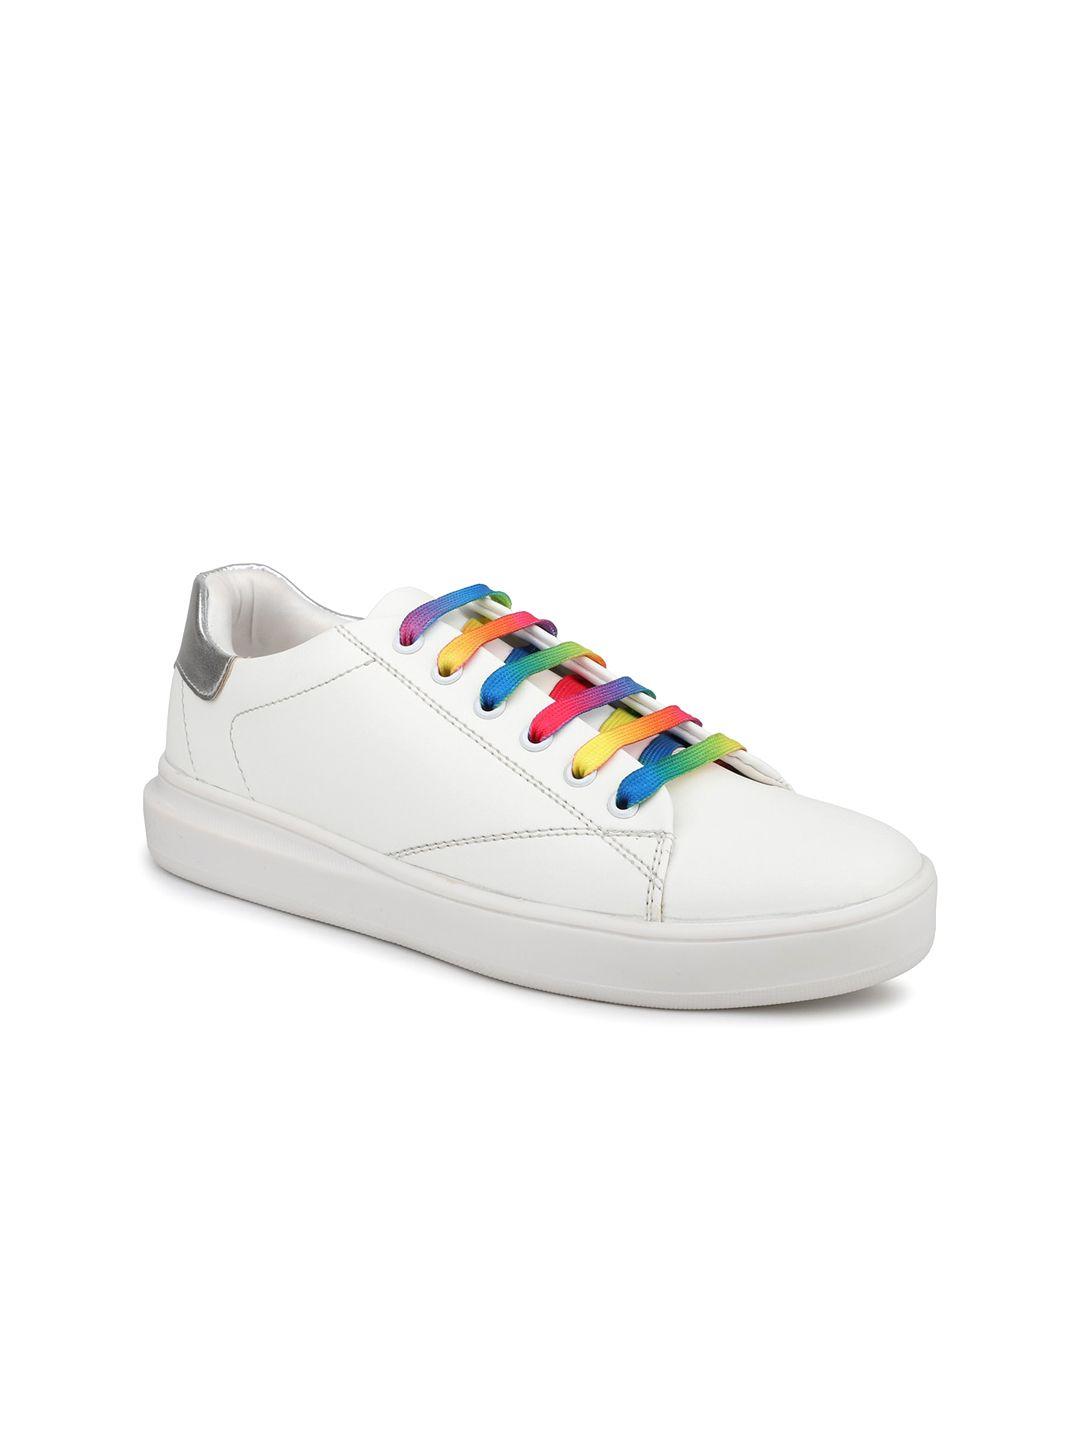 inc 5 women round toe lace-ups sneakers